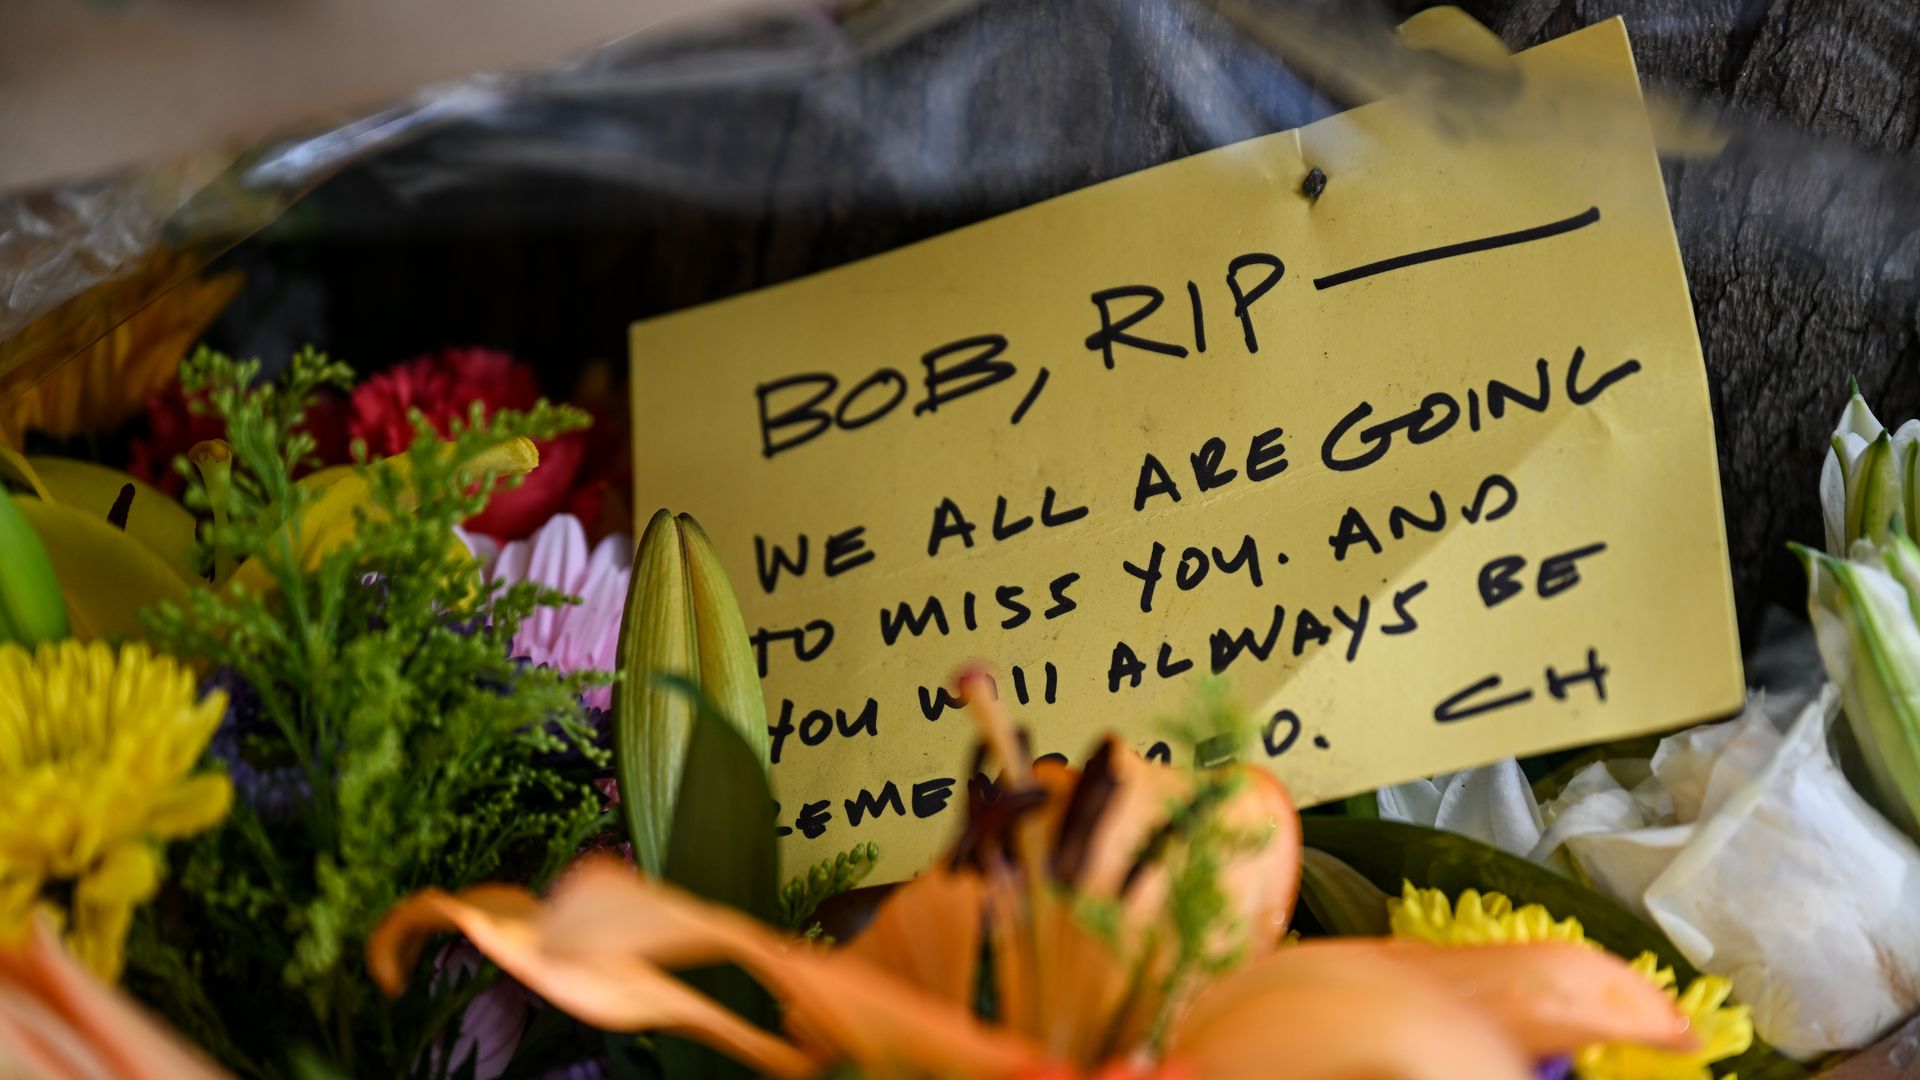 Photo of a note with the written words: "Bob, RIP — we all are going to miss you. And you will always be remembered." The note is surrounded by flowers.